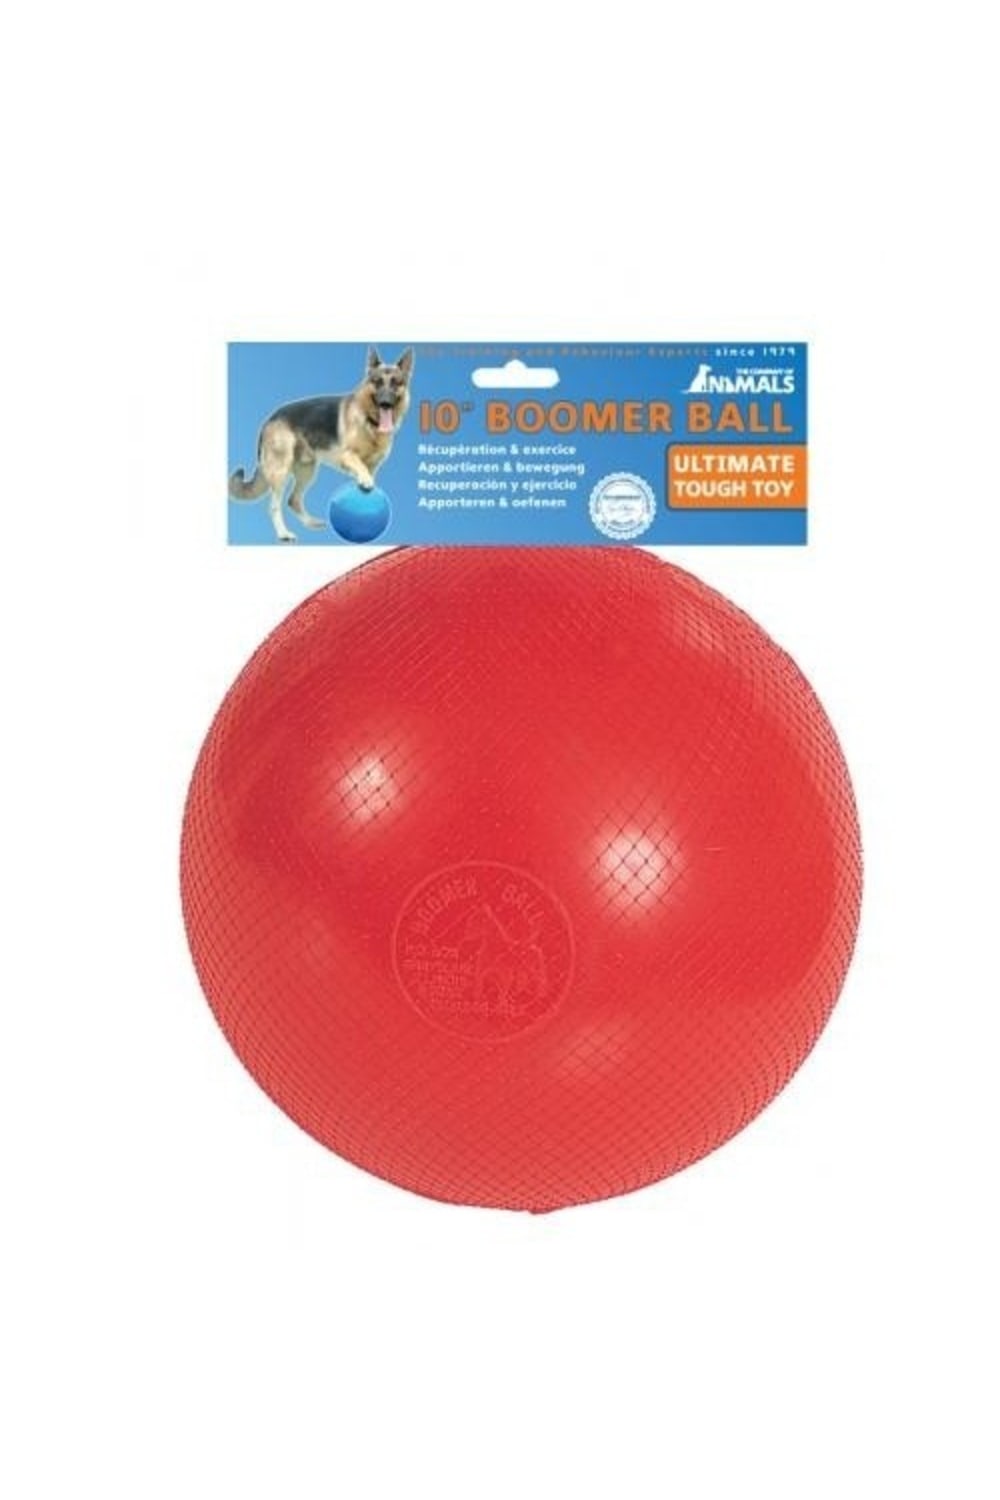 The Company Of Animals Boomer Ball (Red) (10inch)